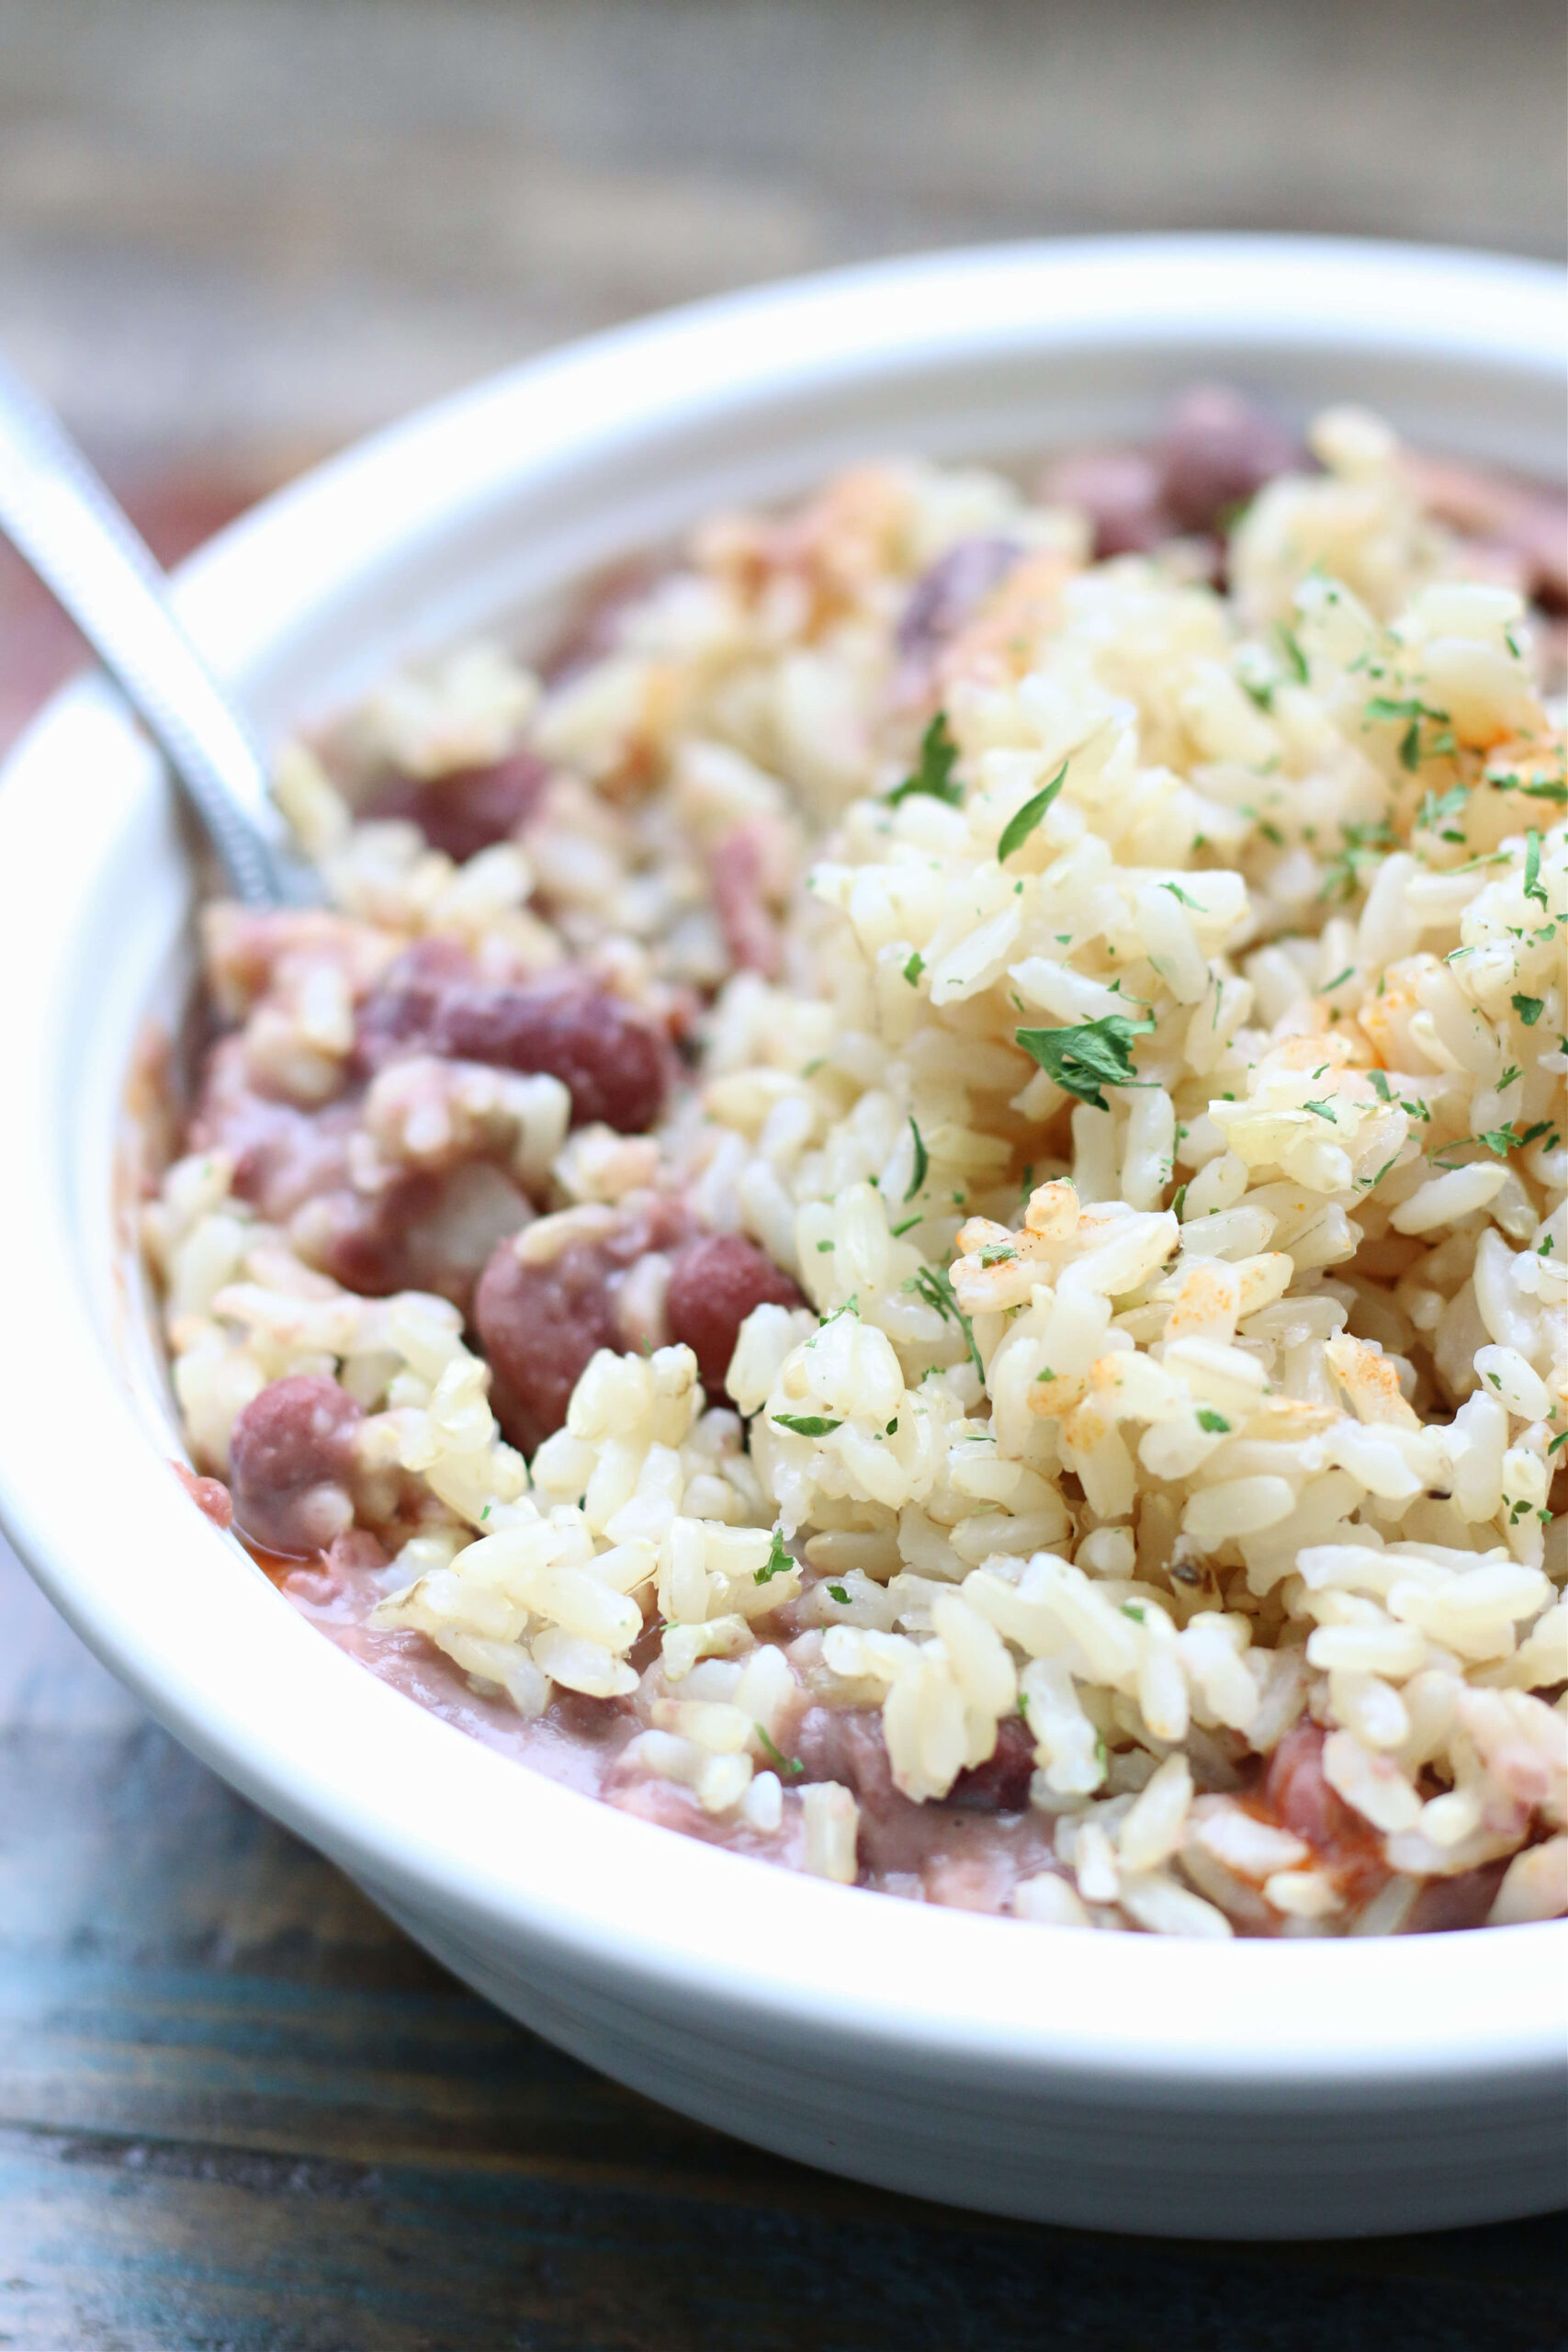 https://www.365daysofcrockpot.com/wp-content/uploads/2022/09/instant-pot-creamy-red-beans-and-rice-recipe-scaled.jpg